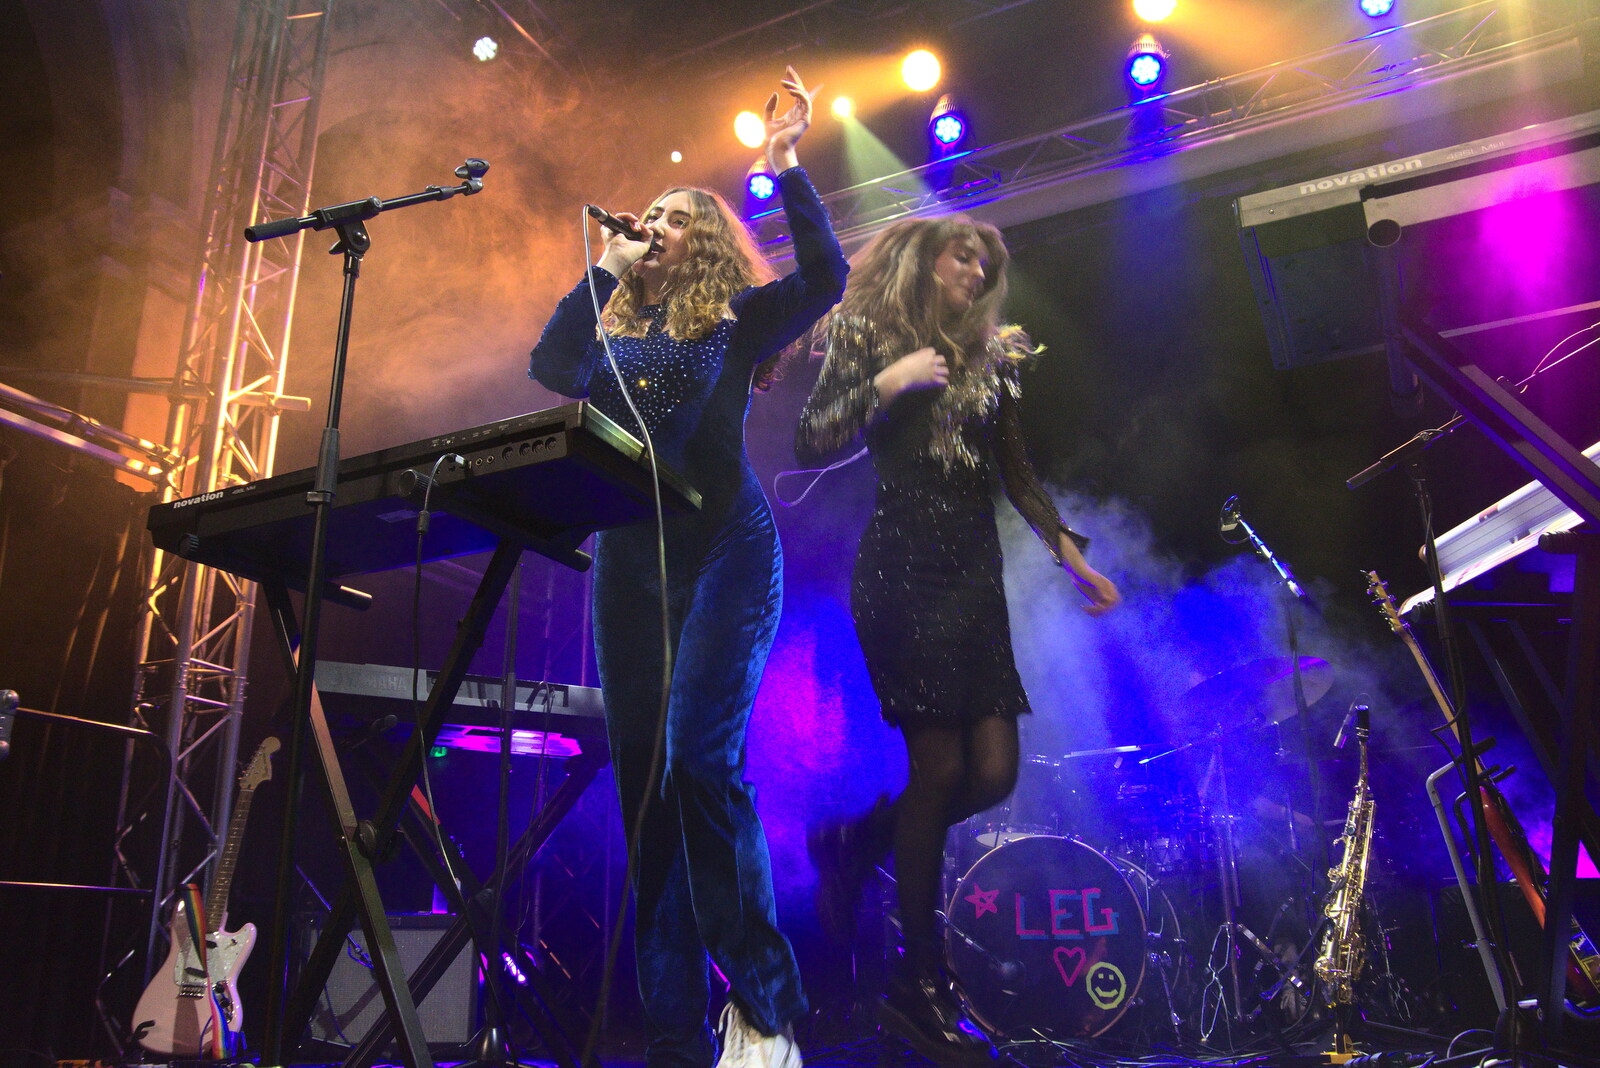 Vanity Fairy and Let's Eat Grandma, Arts Centre, Norwich - 26th January 2022: Let's Eat Grandma perform